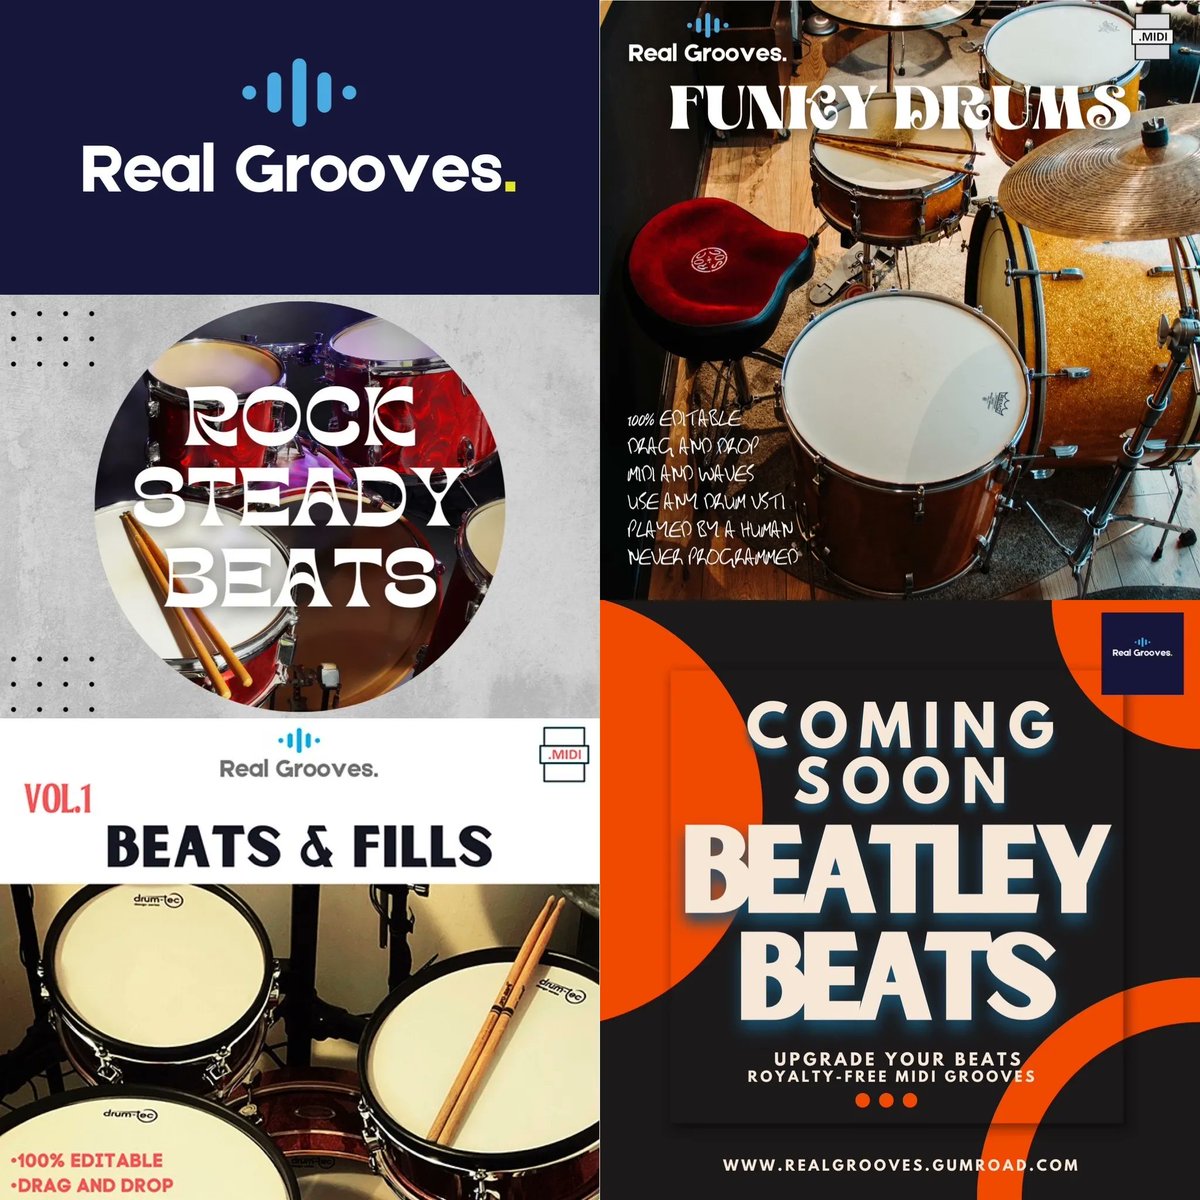 The Funky Drums pack is great for Hip Hop, OG Soul, Sly and Tower of Power type tracks; Rock Steady Beats is perfect for all things Rock, Pop and Indie 
buff.ly/3Z3TkmV

#midigrooves #musicmaker #mididrumtracks #homerecordingstudio #midibeats #midi #realgrooves